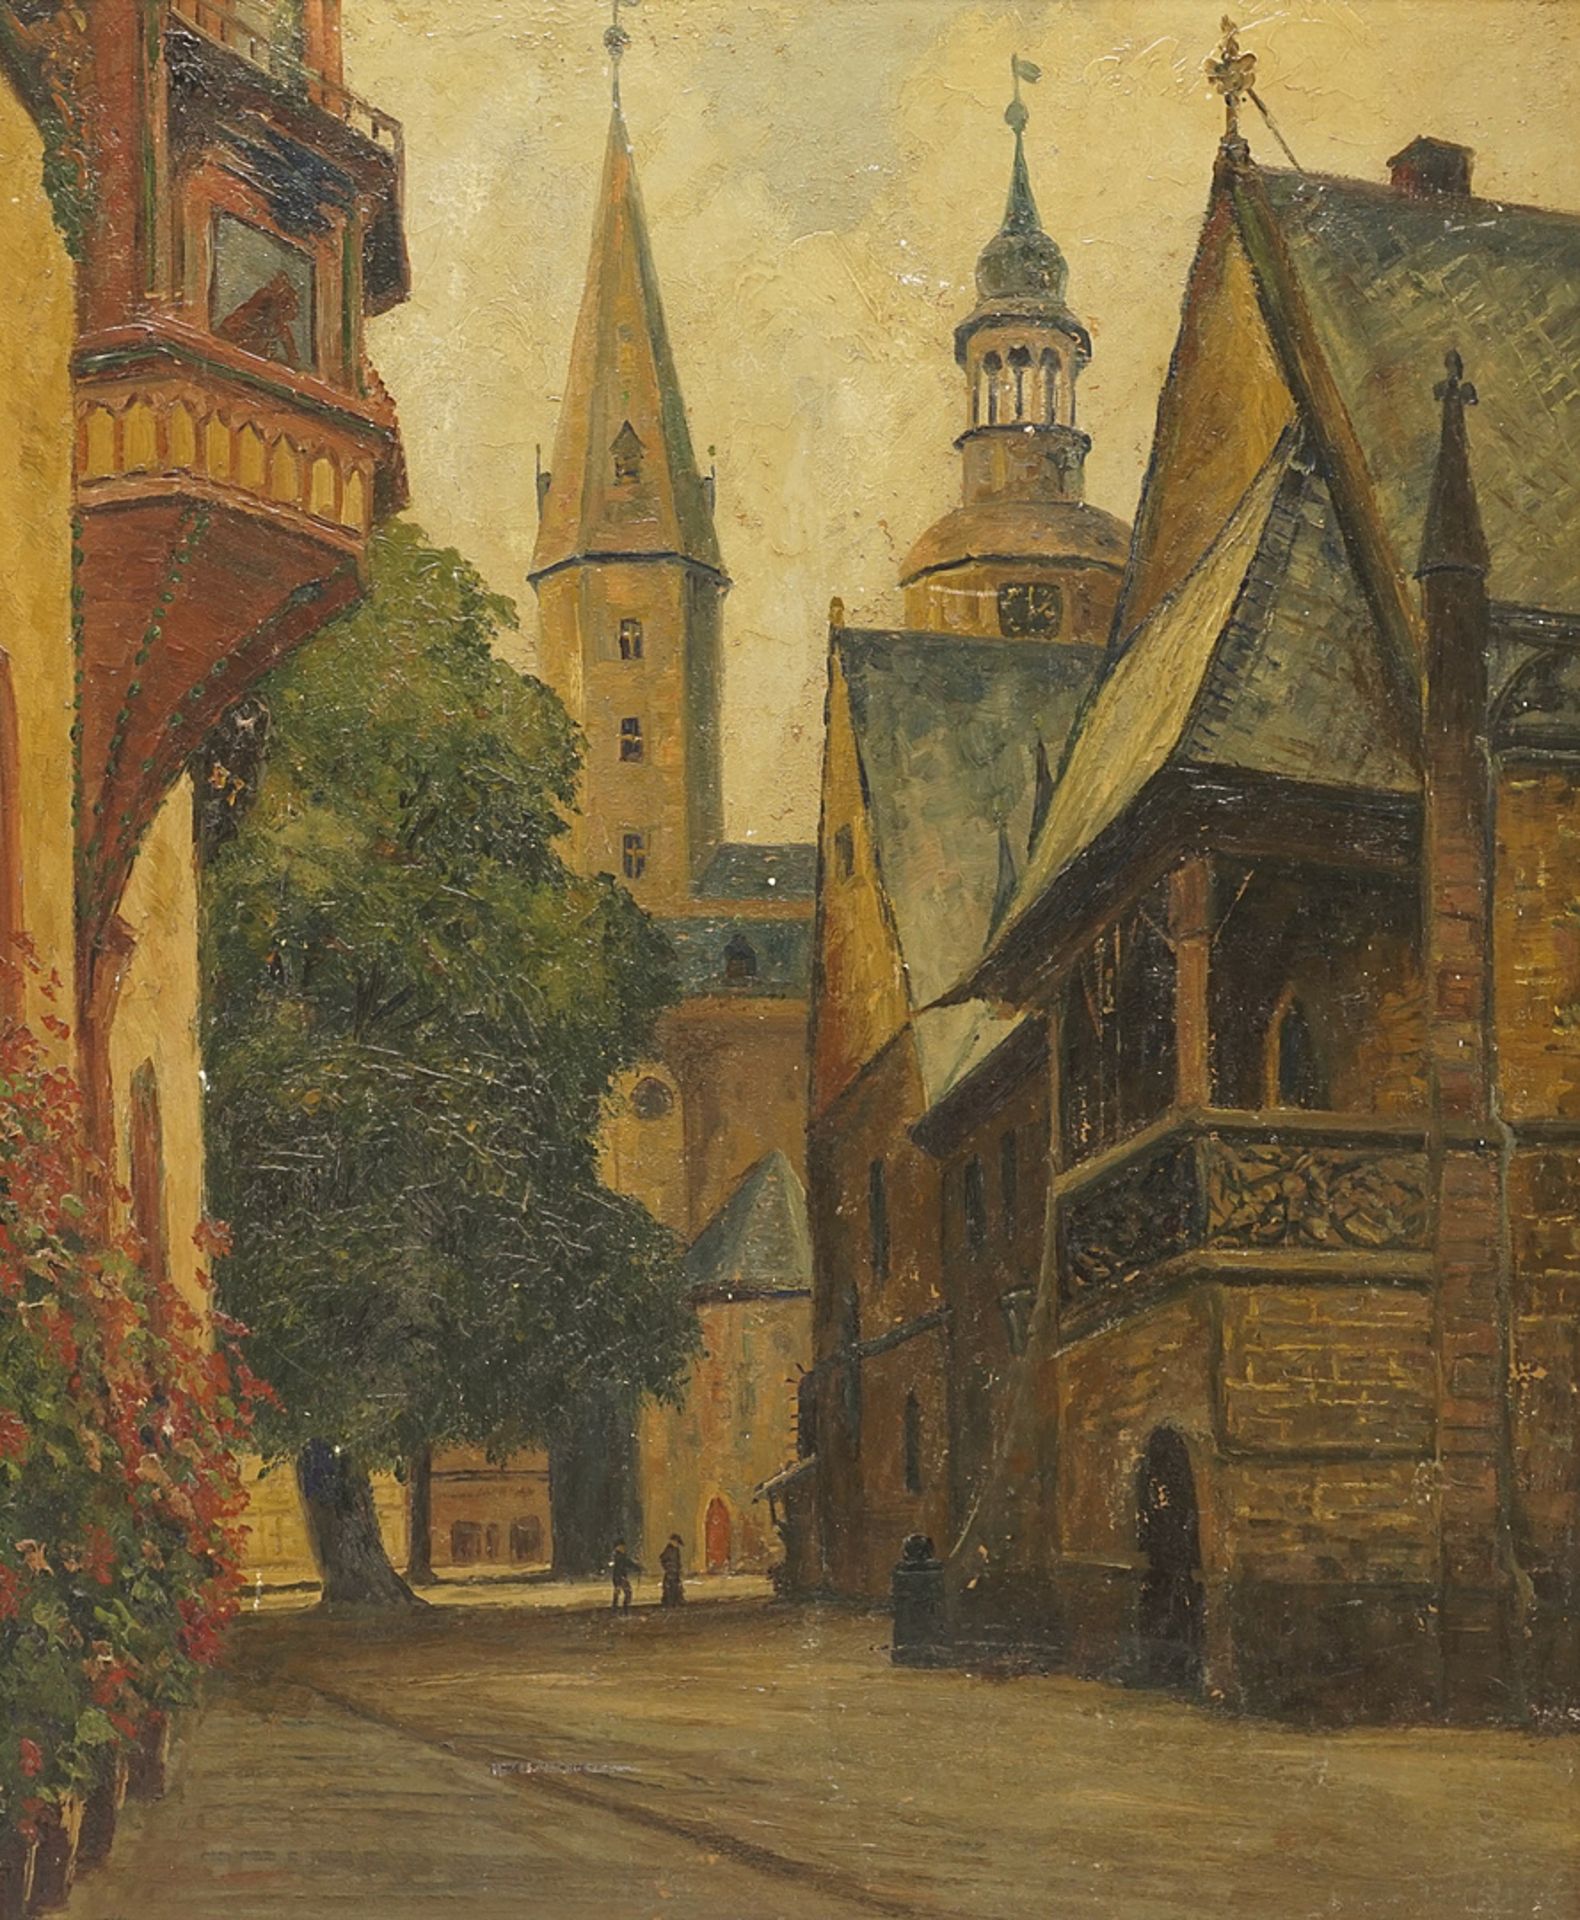 Fritz Thate (1889-1968), The market square in Goslar